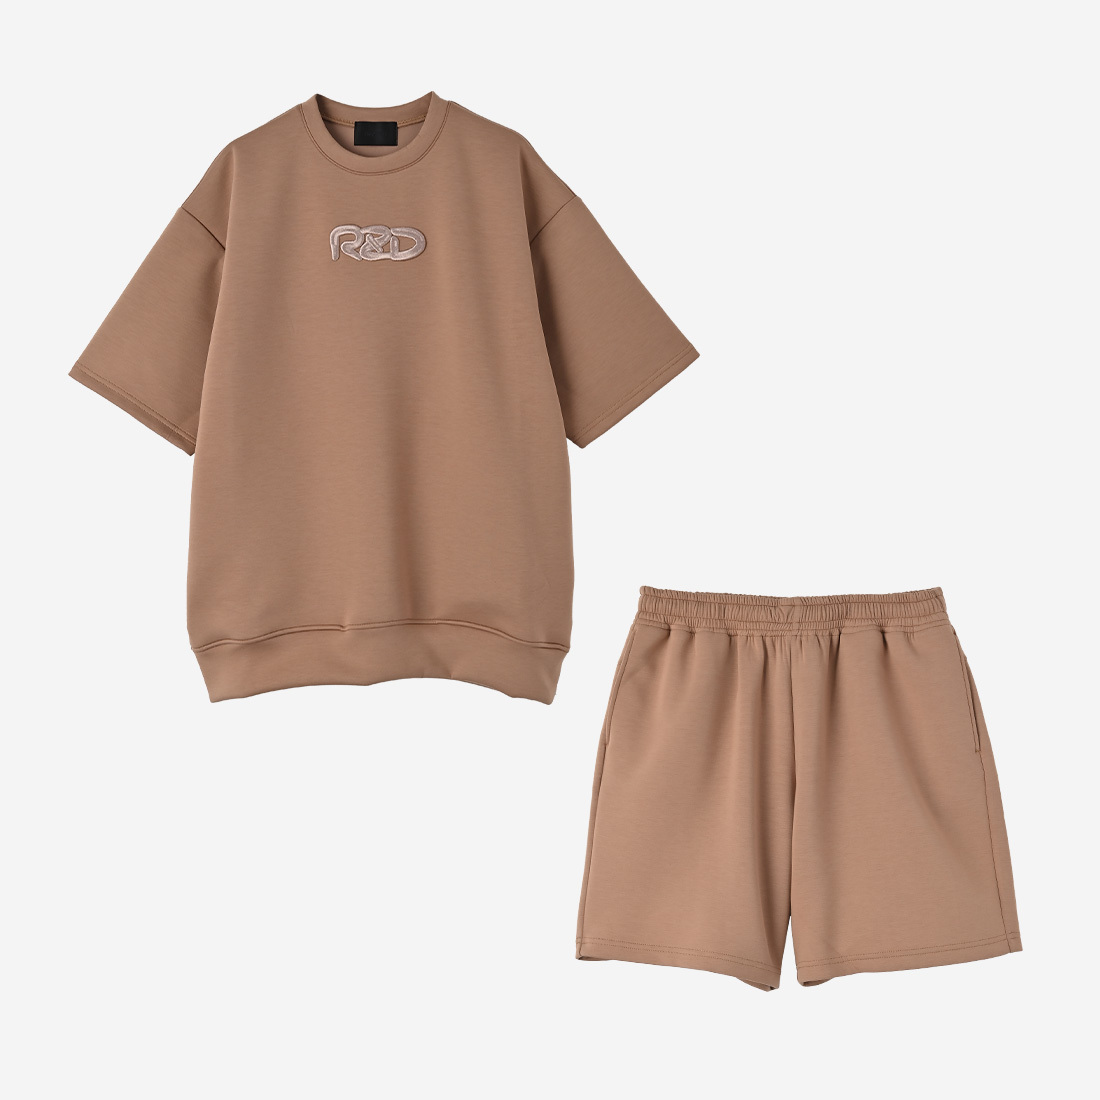 【ReZARD】SETUP Thick Embroidery Room Wear(Beige)